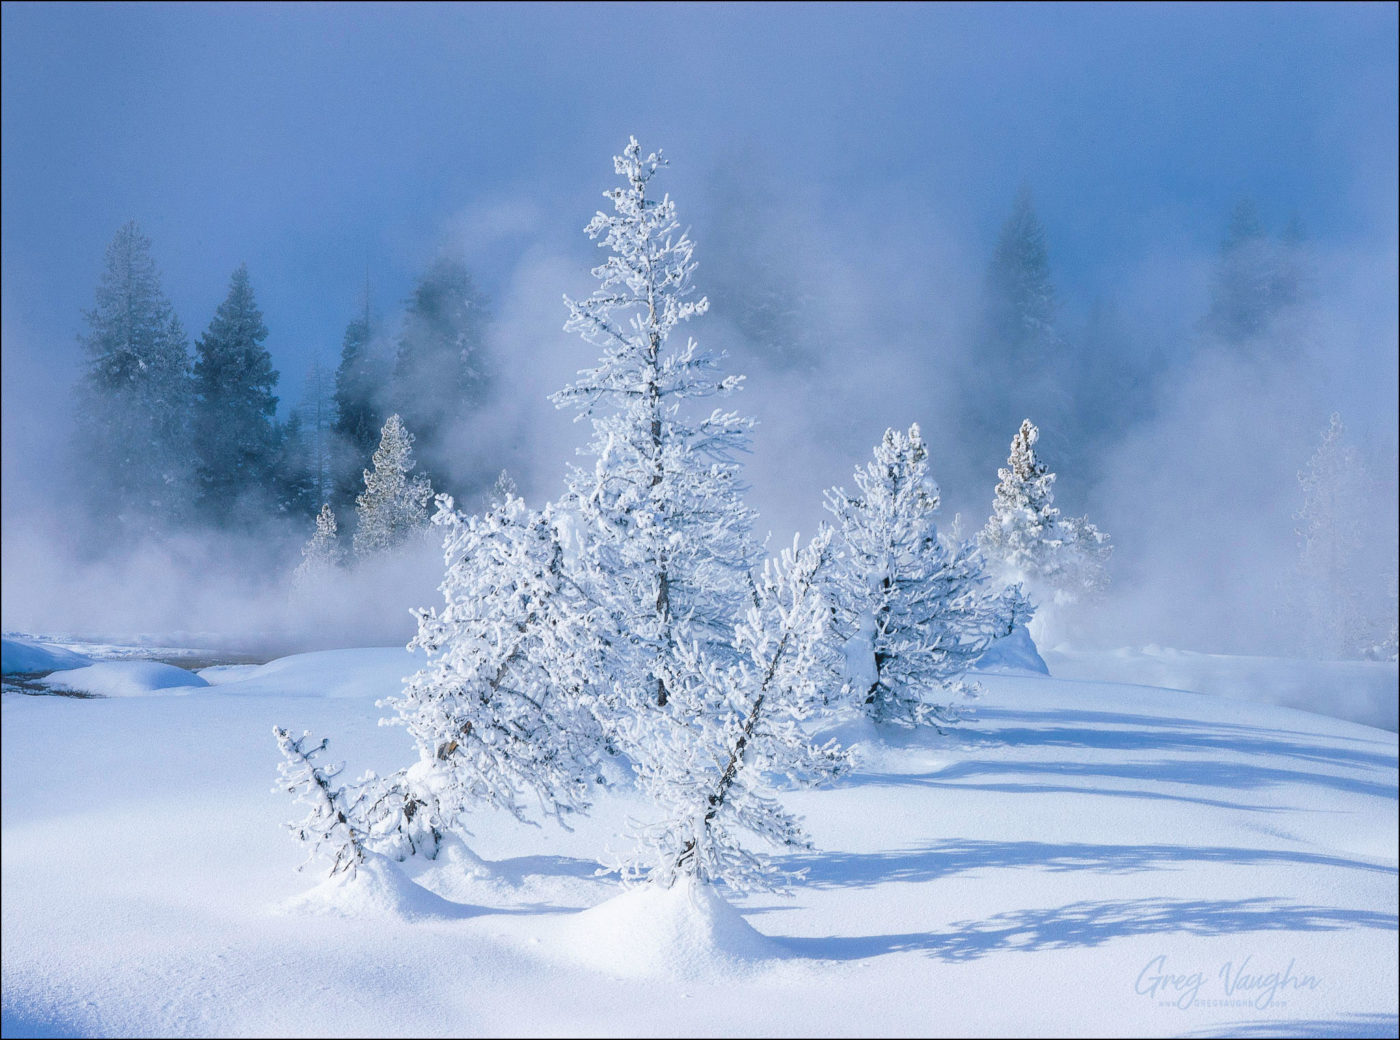 Frost and snow-covered pine trees; West Thumb Geyser Basin, Yellowstone National Park, Wyoming.